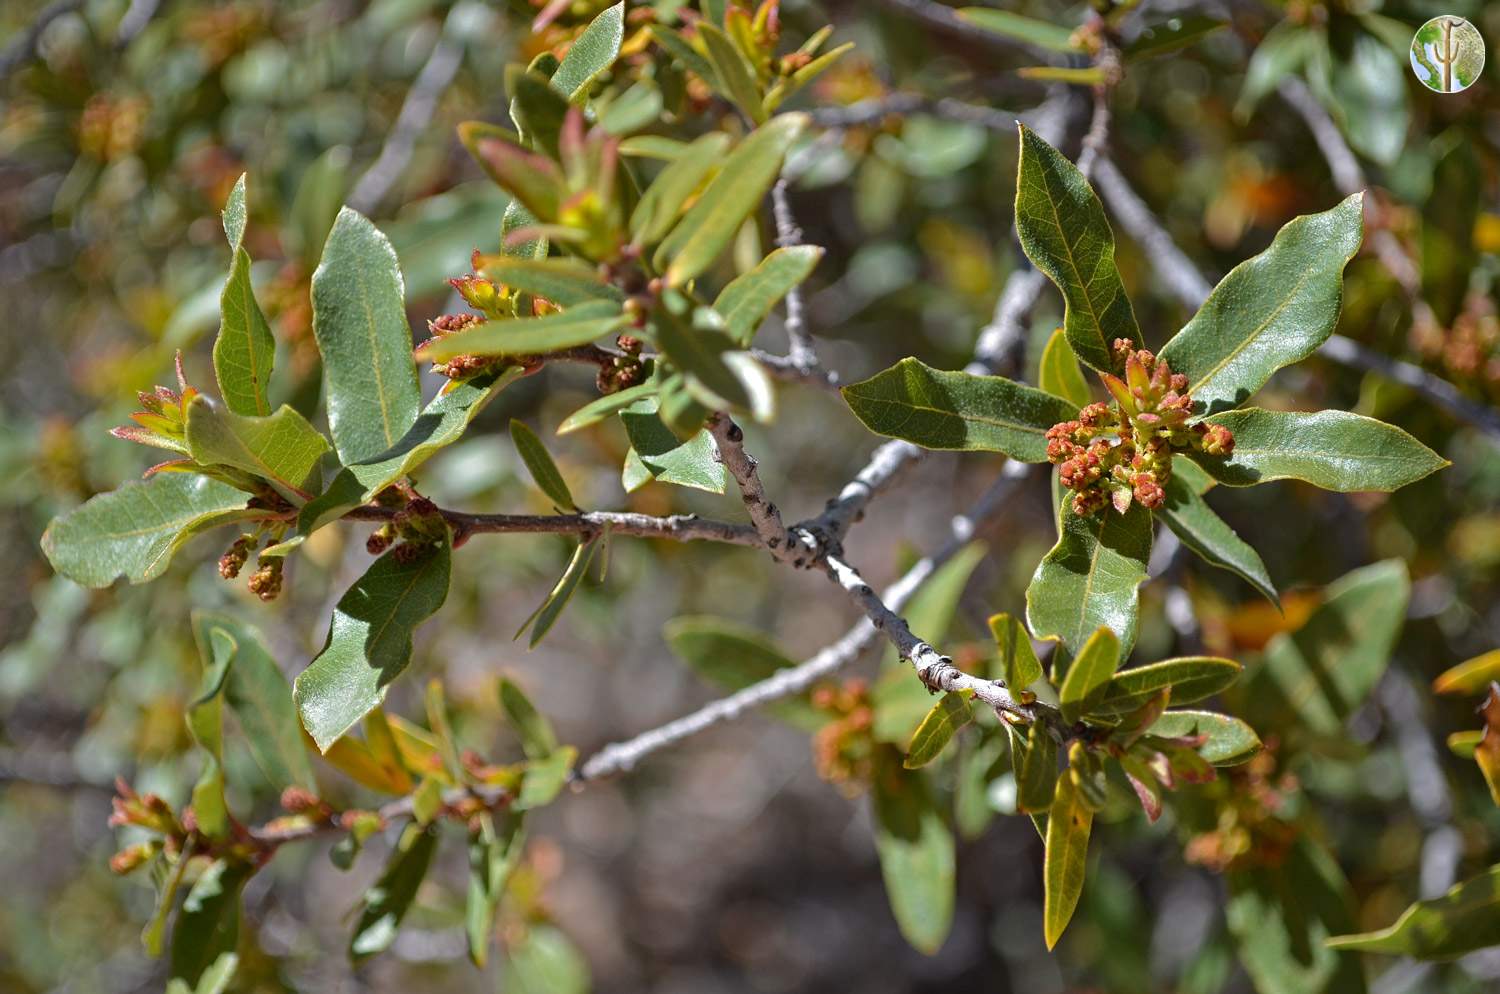 Quercus toumeyi with fresh leaves and young flower buds